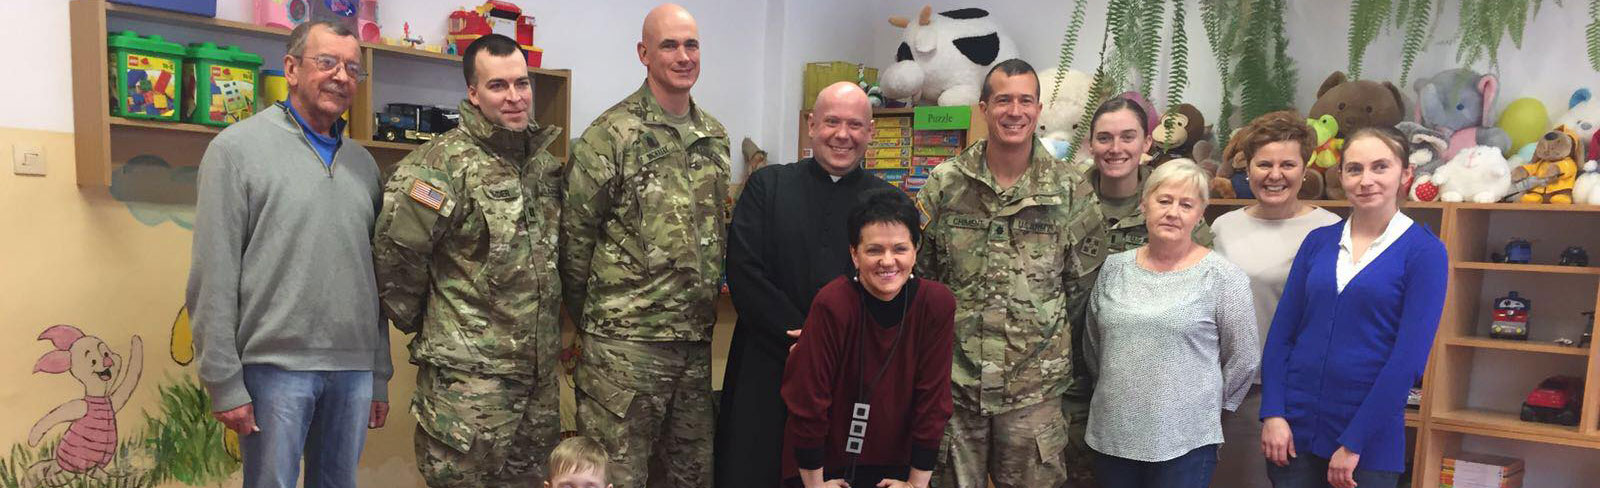 Help US soldiers build relationships in Poland through bookcases